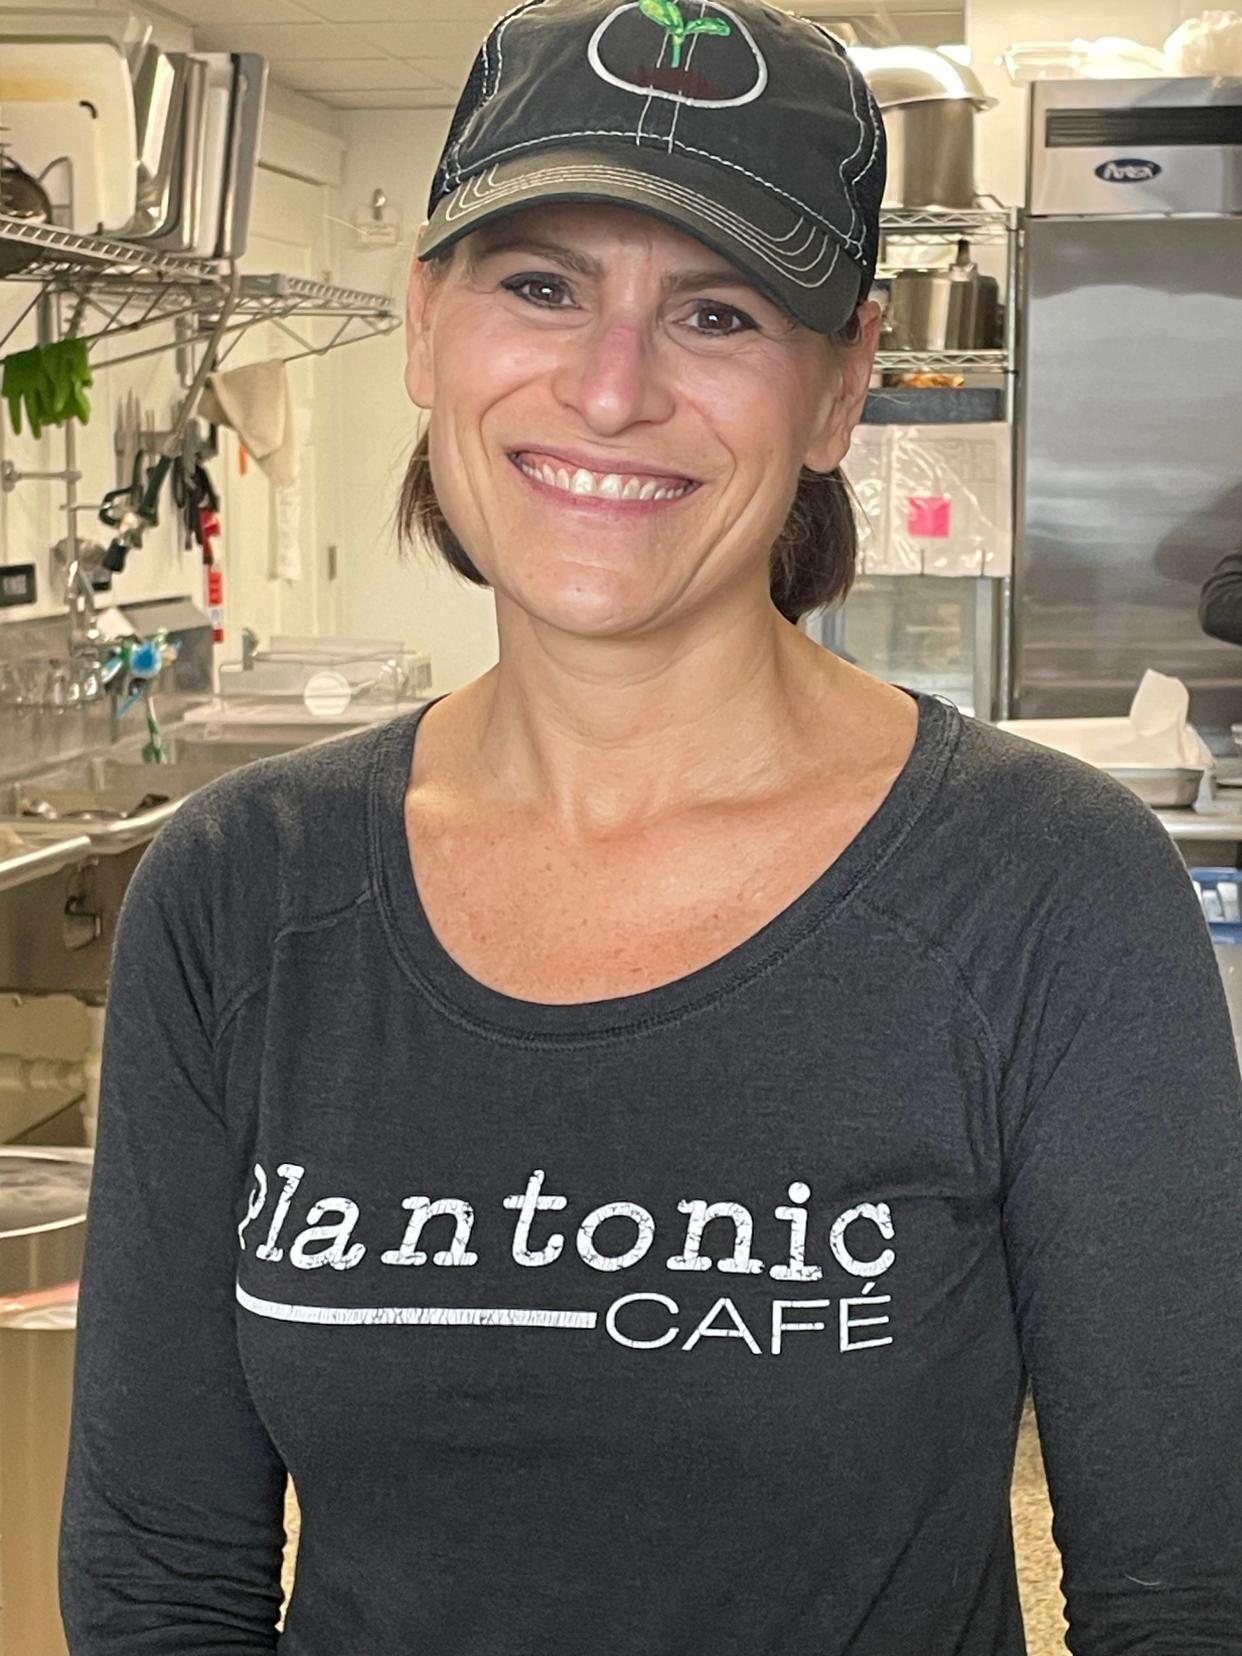 After discovering she had a long list of allergies, Tanya Fransen began cooking and eating gluten- and dairy-free meals and played around with raw, vegan and plant-based recipes. She now offers those to others through her cafe, Plantonic, in Hartford.